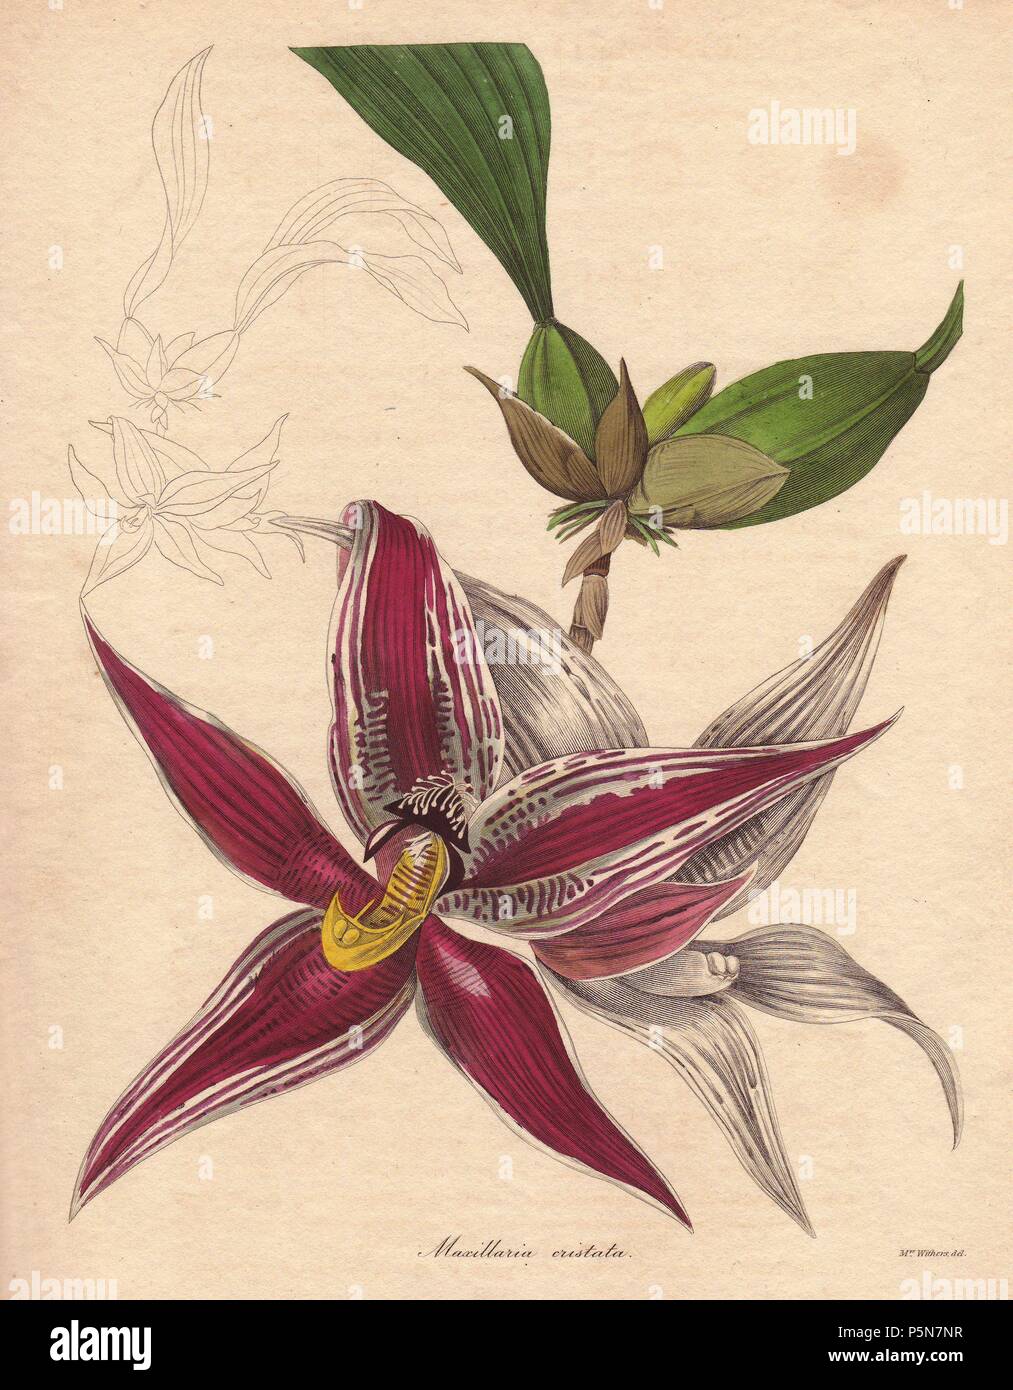 Paphinia (Maxillaria) cristata is a species of orchid endemic to northern South America. One to three pendant inflorescences bear large, crimson and white-striped, star-shaped flowers. . . Augusta Innes Withers (17931877): Augusta Baker, a clergyman's daughter, lived and worked in London all her life. She married an accountant, Theodore Withers, 20 years her senior, and gave lessons in flower painting. She became Flower Painter in Ordinary to Queen Adelaide. During the 1830s and 40s, she drew for books and magazines such as Lindley's Pomological Magazine, Curtis's Botanical Magazine, and Tran Stock Photo